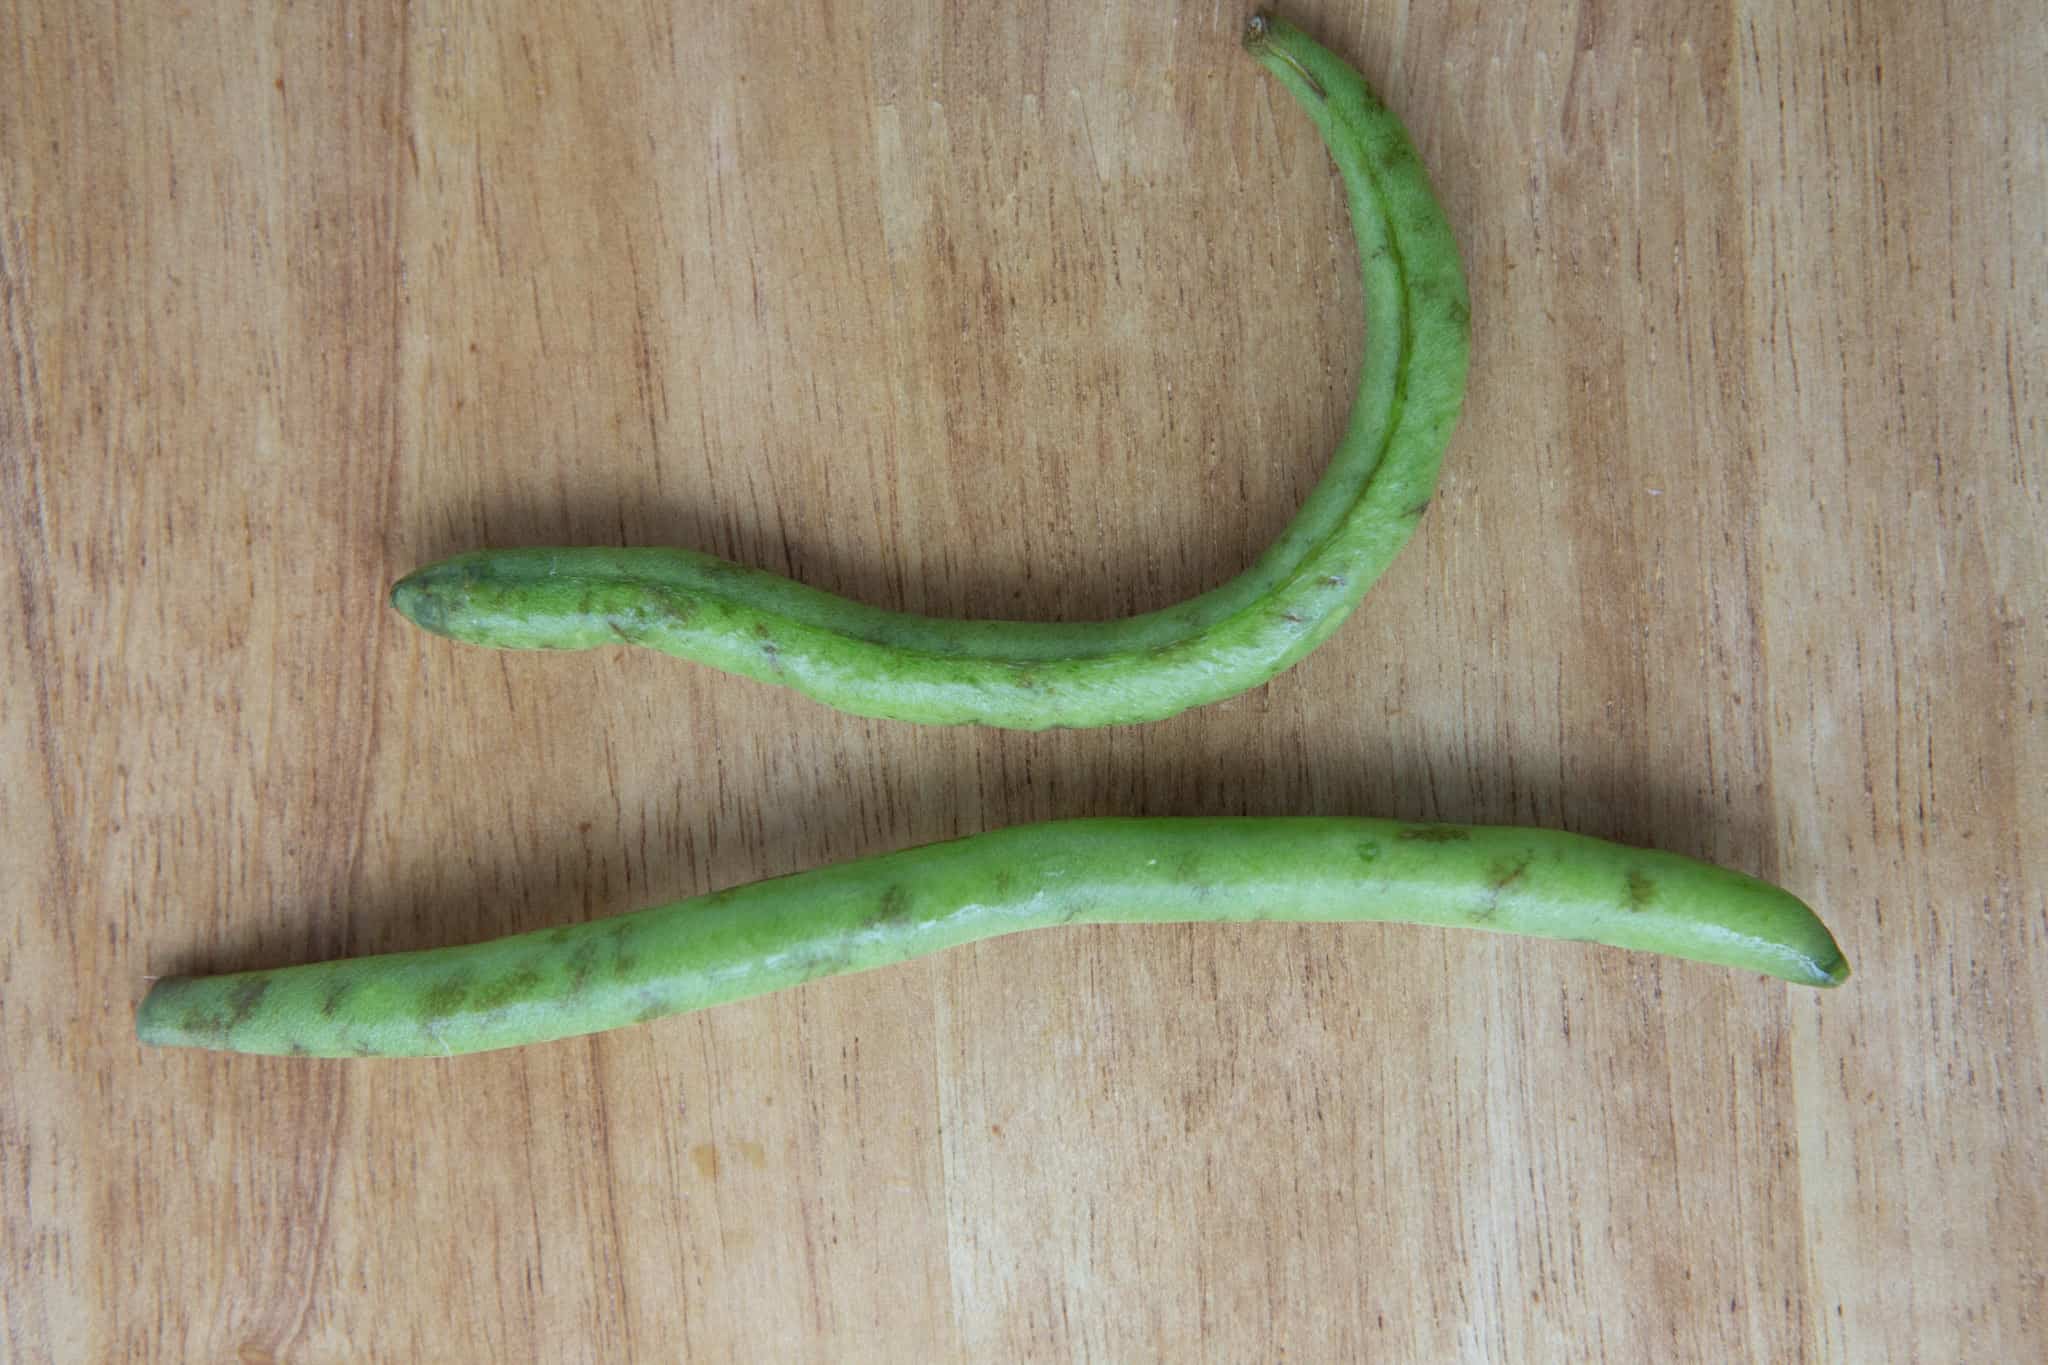 green beans with just a few brown spots